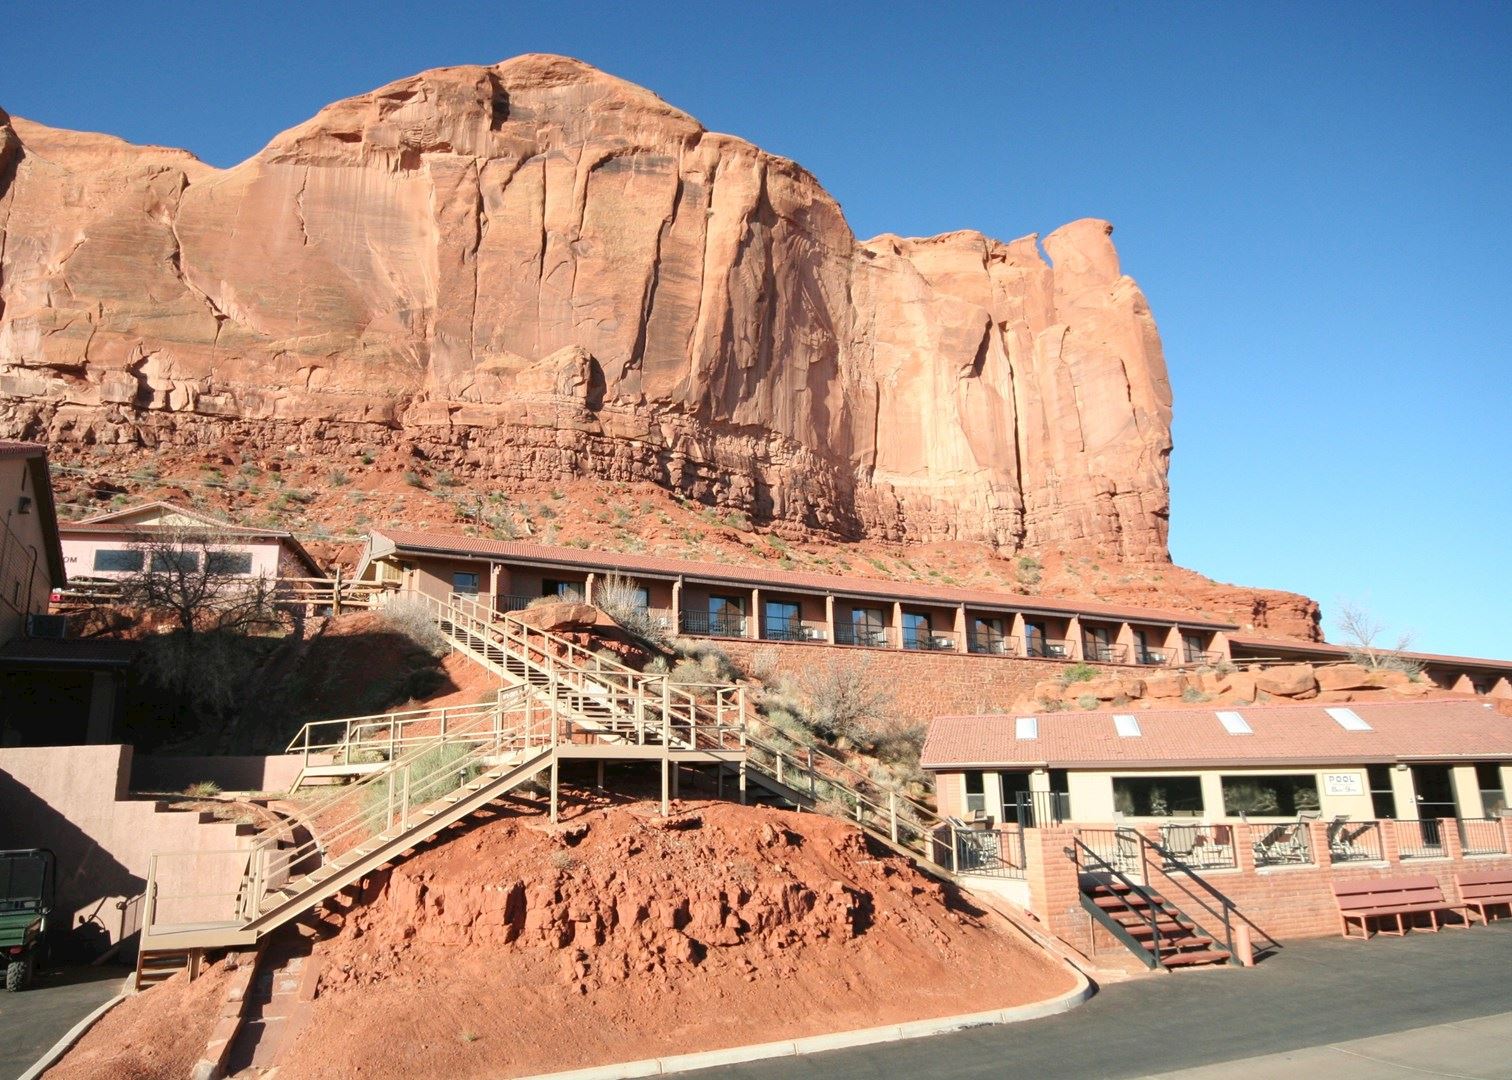 Gouldings Trading Post and Lodge | Monument Valley, Utah 